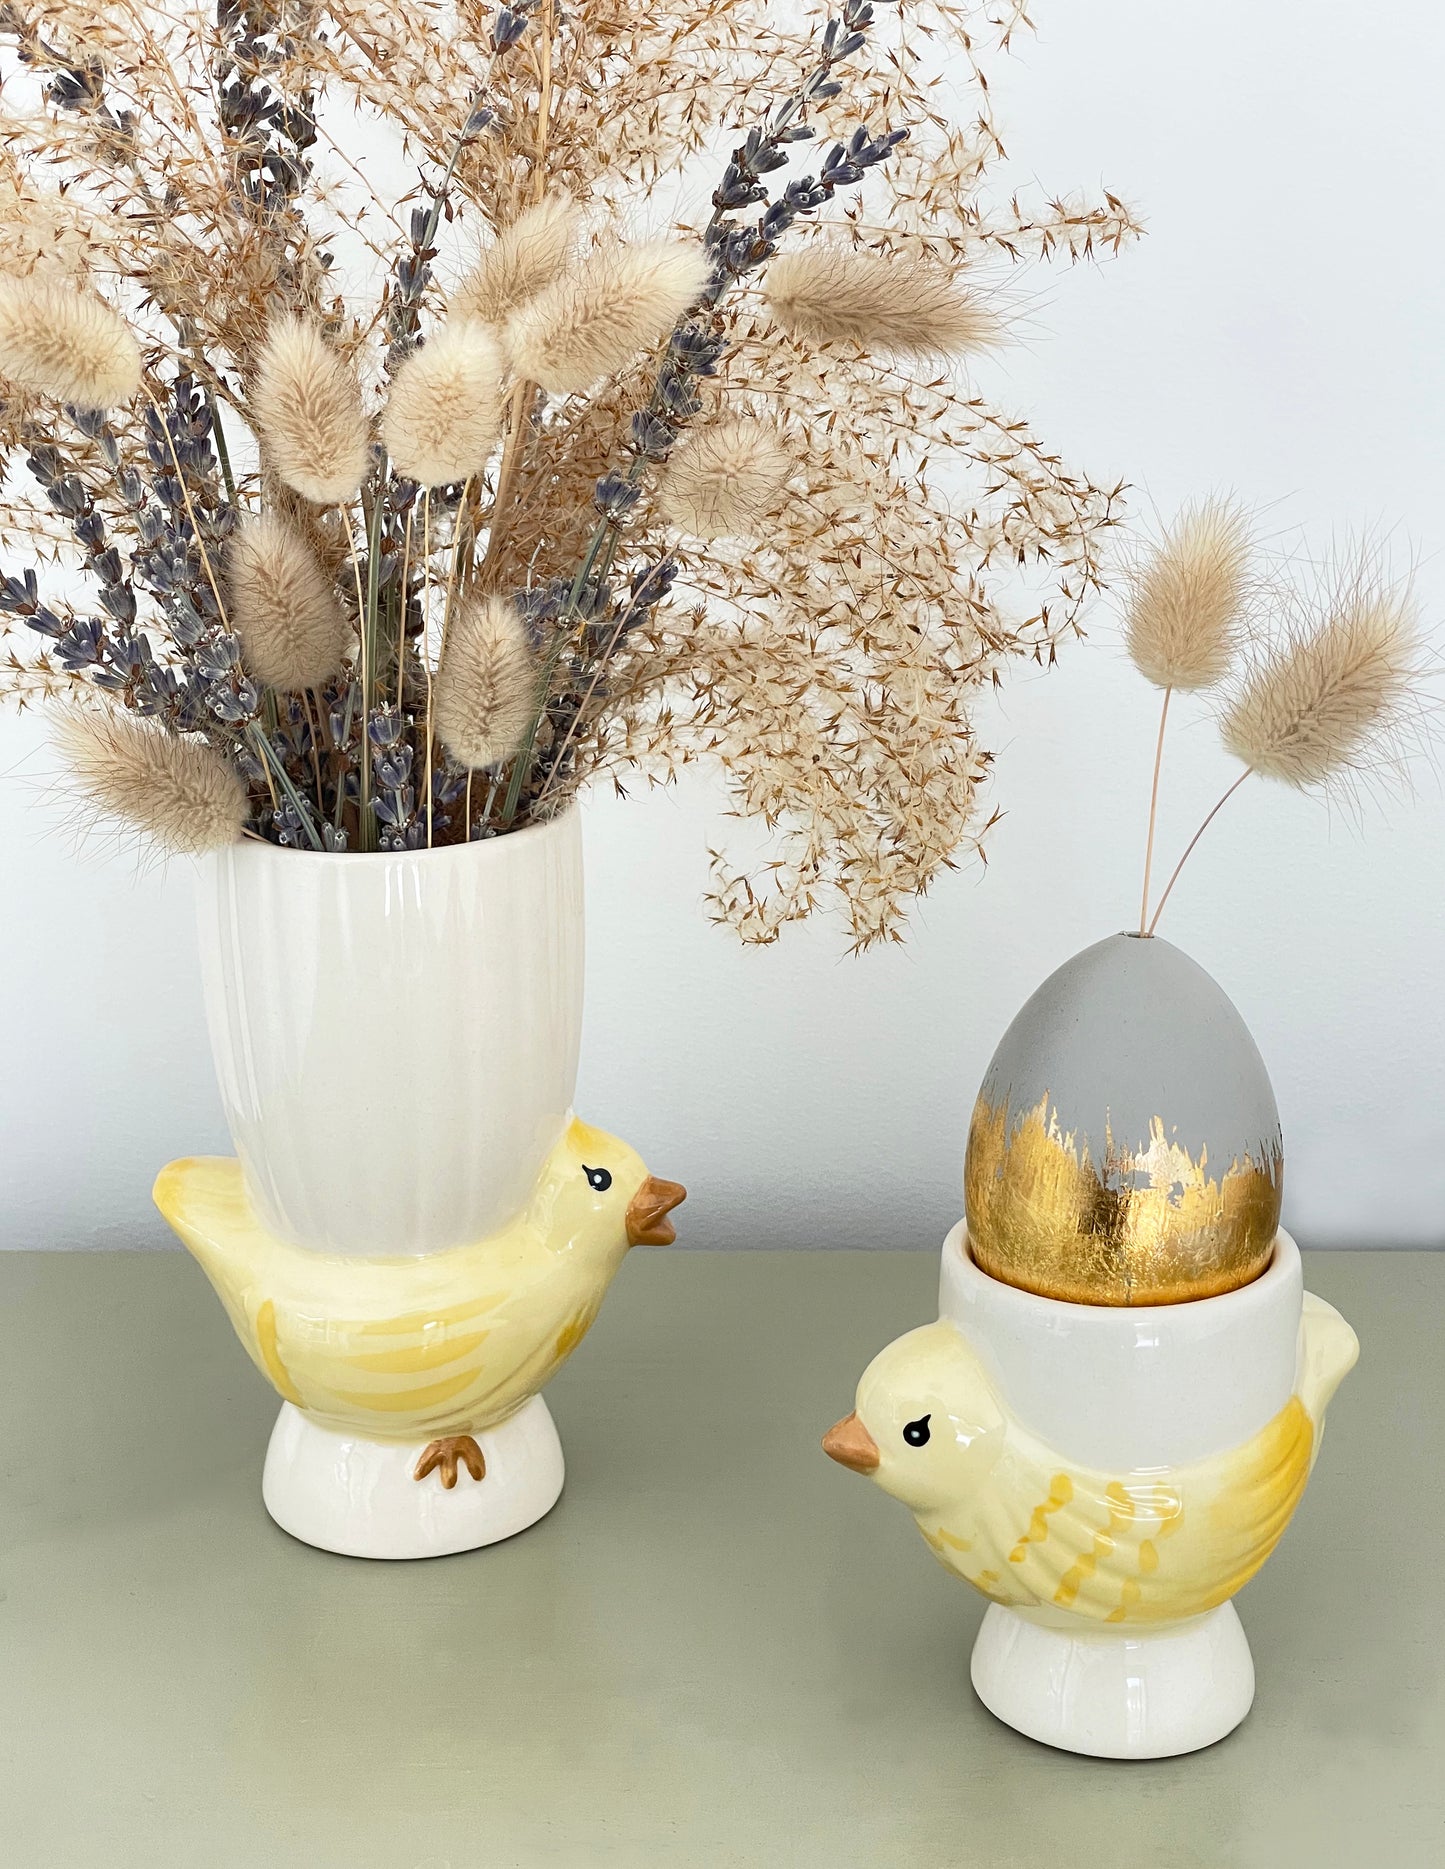 Yellow Chick Ceramic Egg Cup